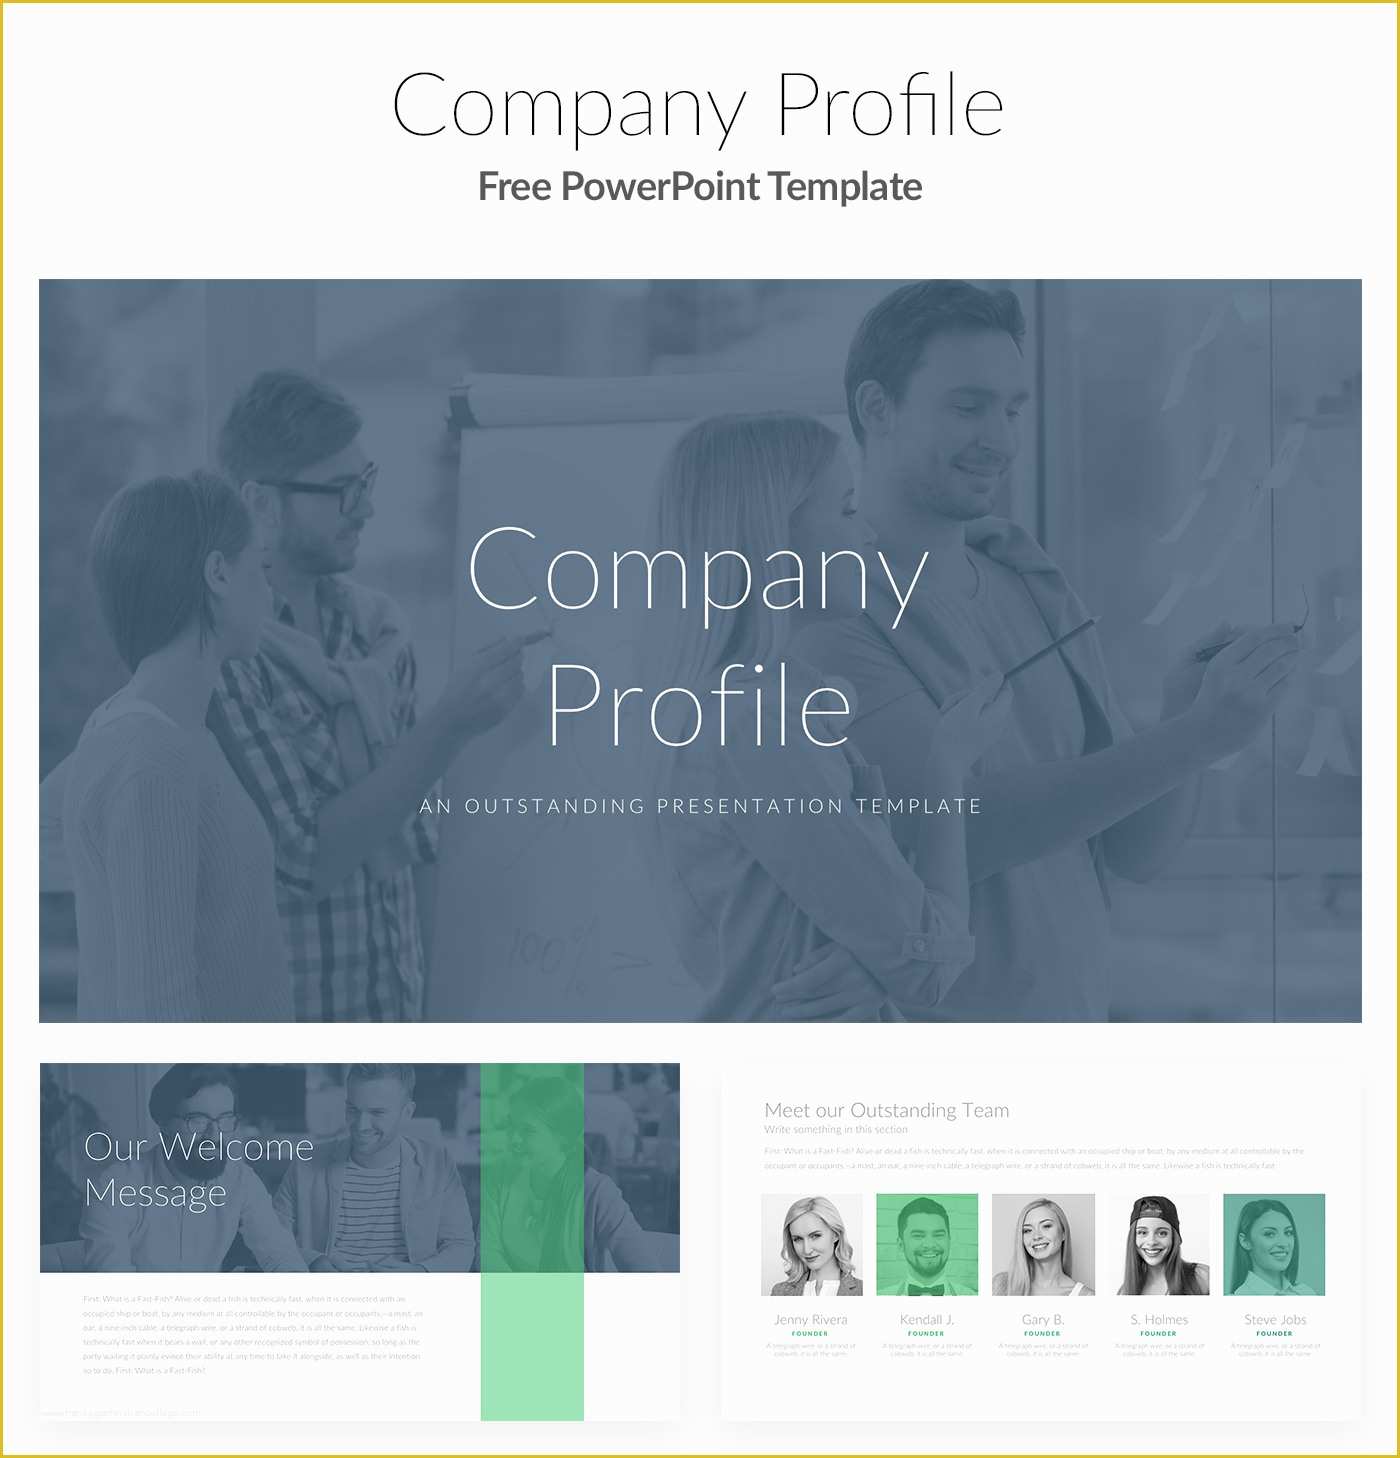 Company Profile Template Powerpoint Free Download Of 50 Best Free Cool Powerpoint Templates Of 2018 Updated